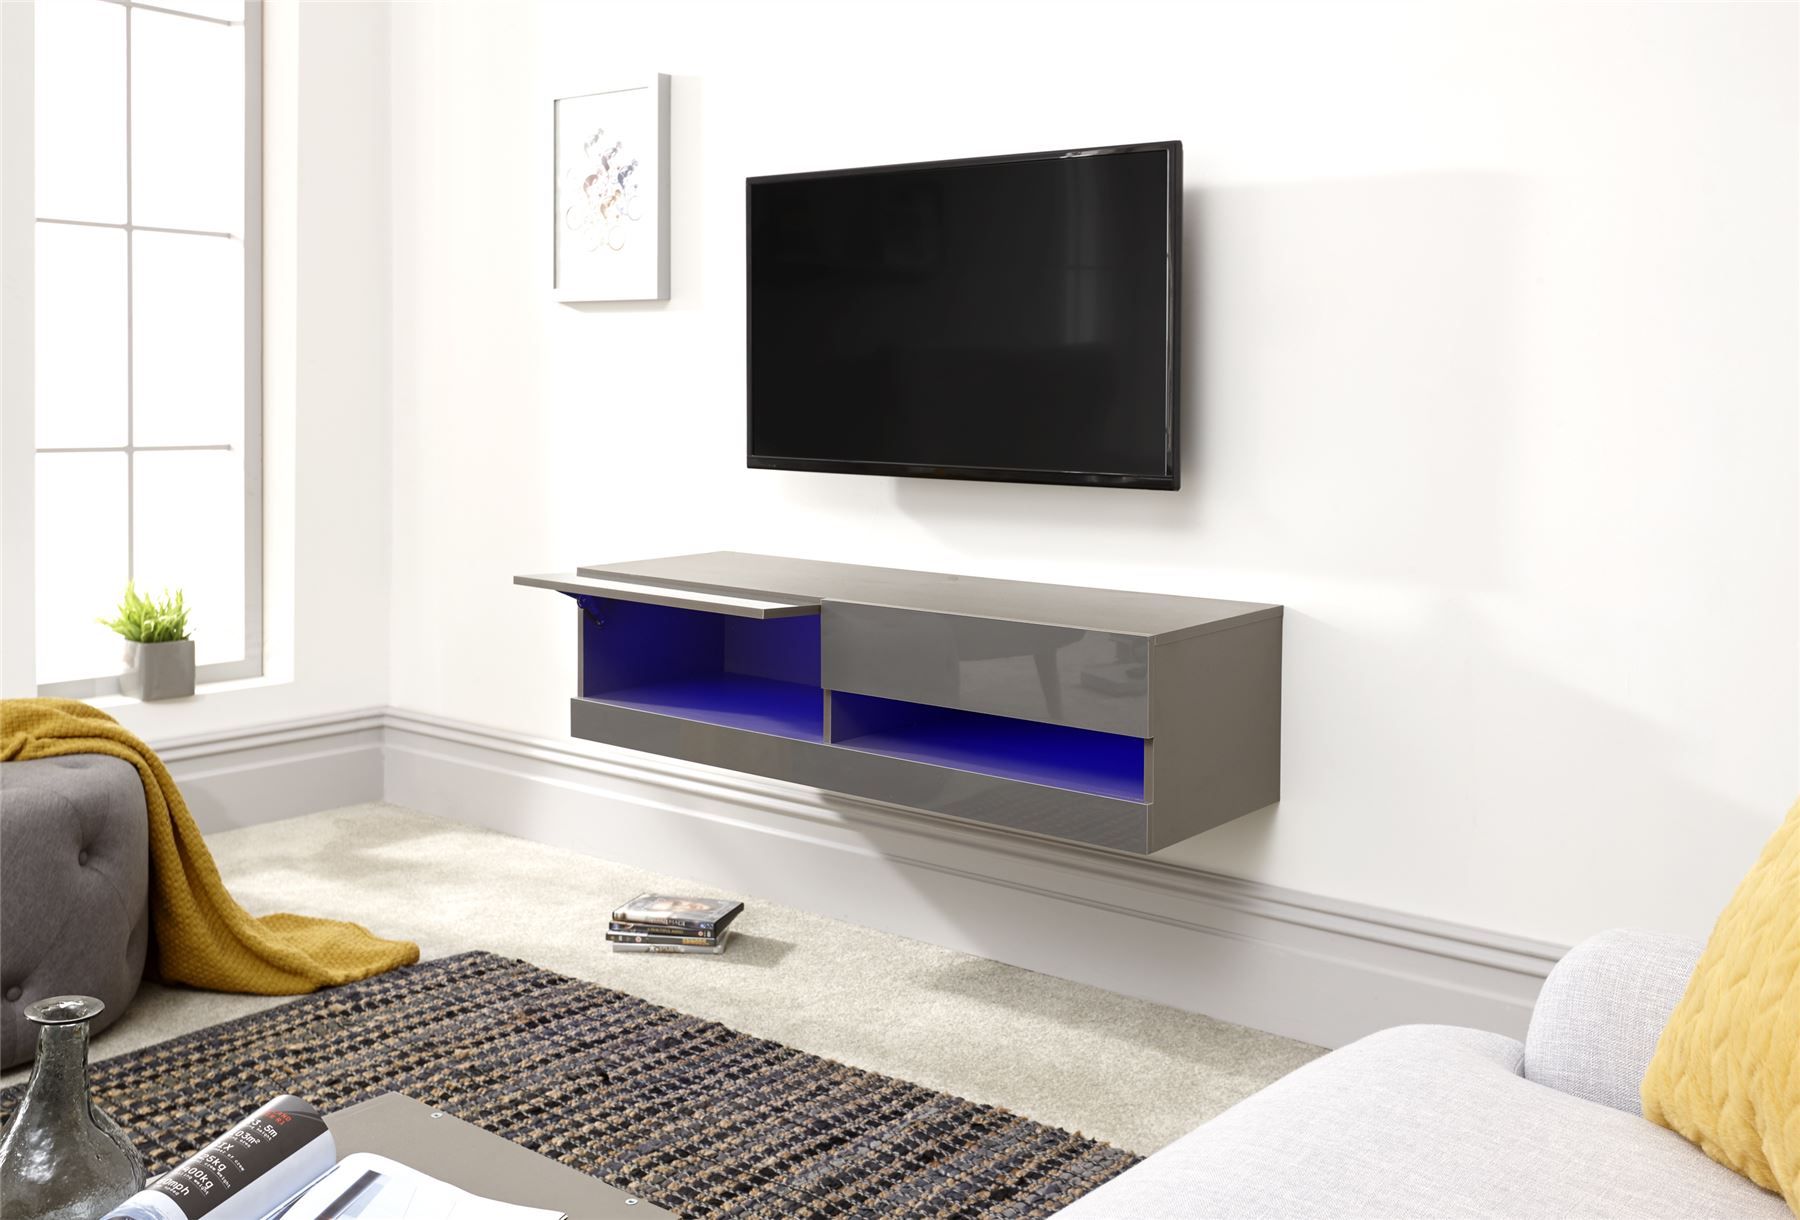 Galicia 120cm 150cm 180cm Wall Tv Unit Stand W/ Led Lcd Within Galicia 180cm Led Wide Wall Tv Unit Stands (View 3 of 15)